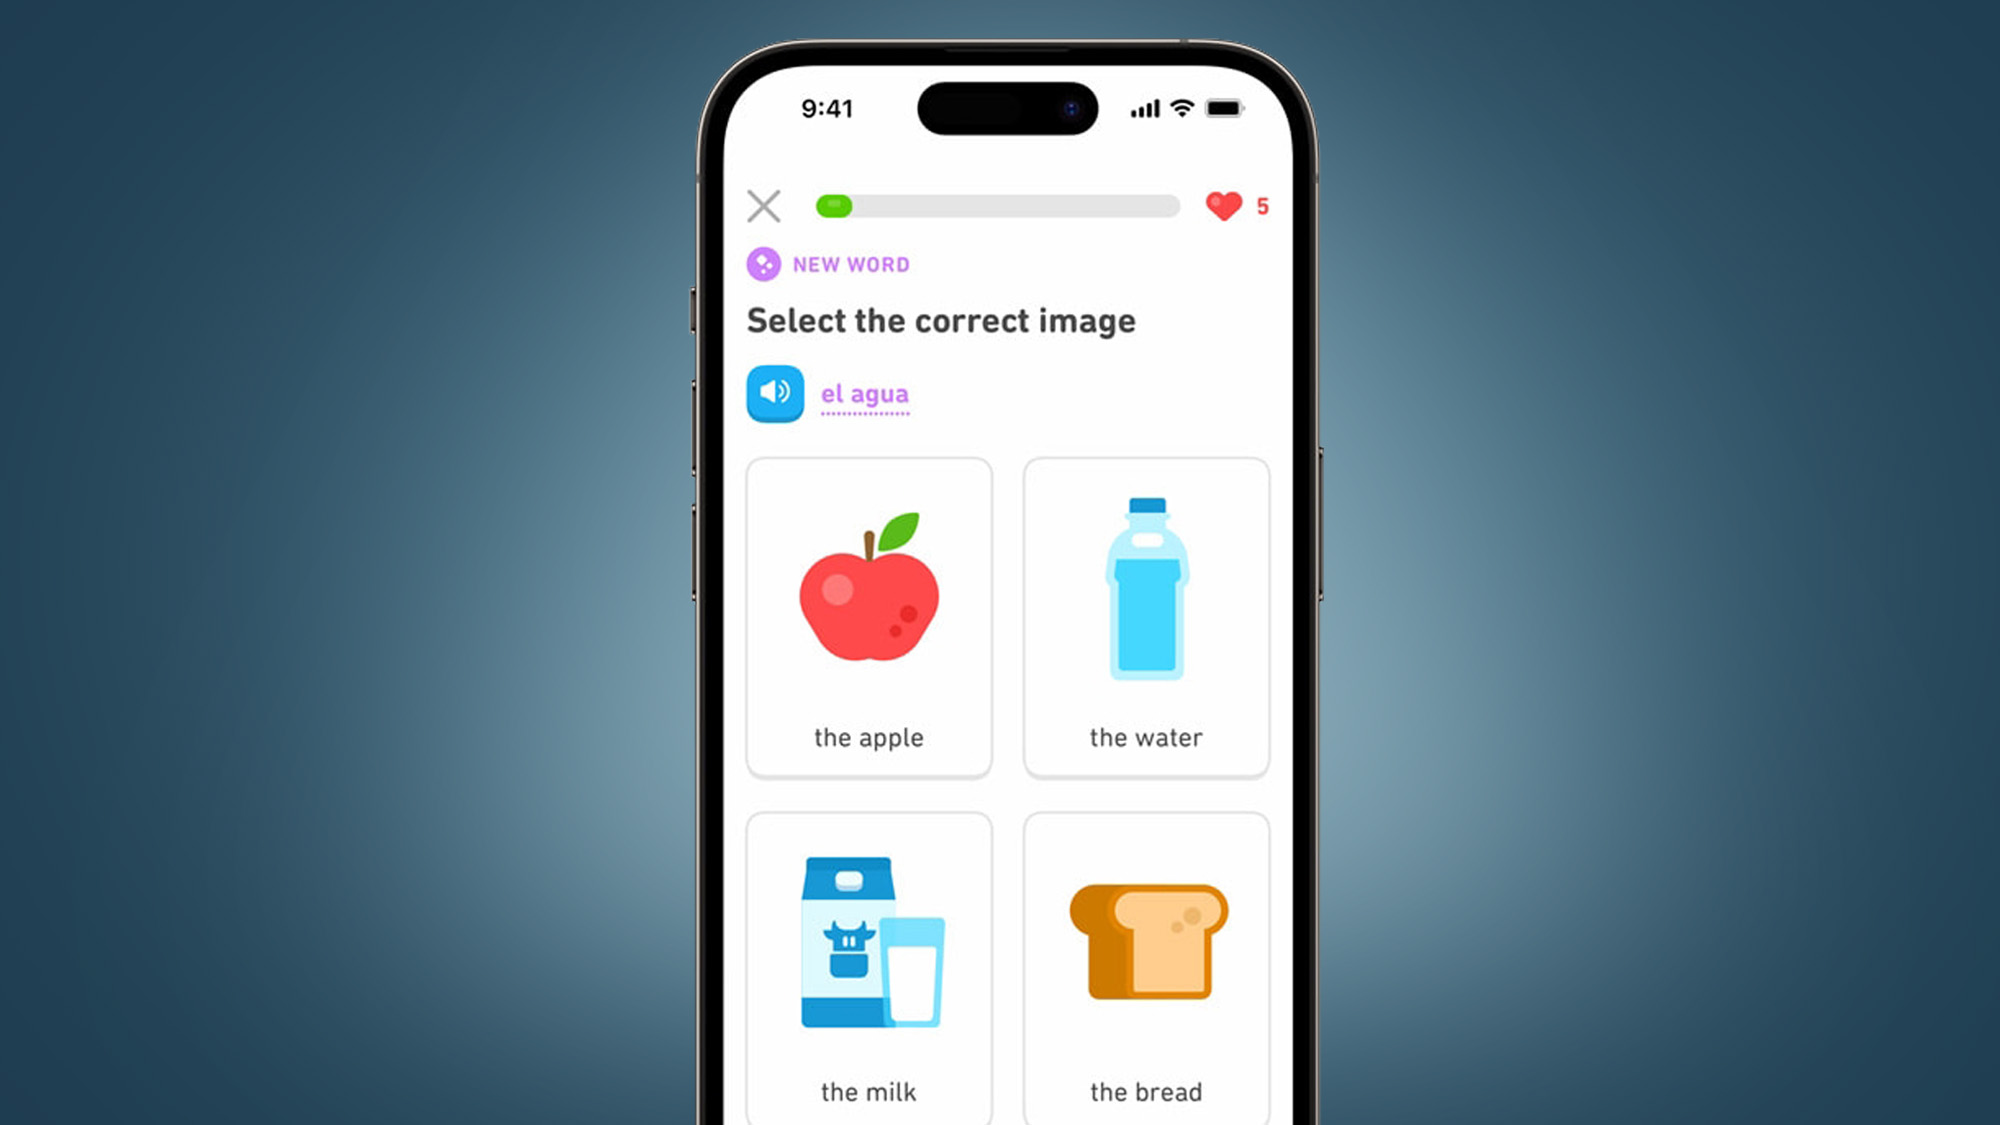 Mobile phone with blue background showing Duolingo app